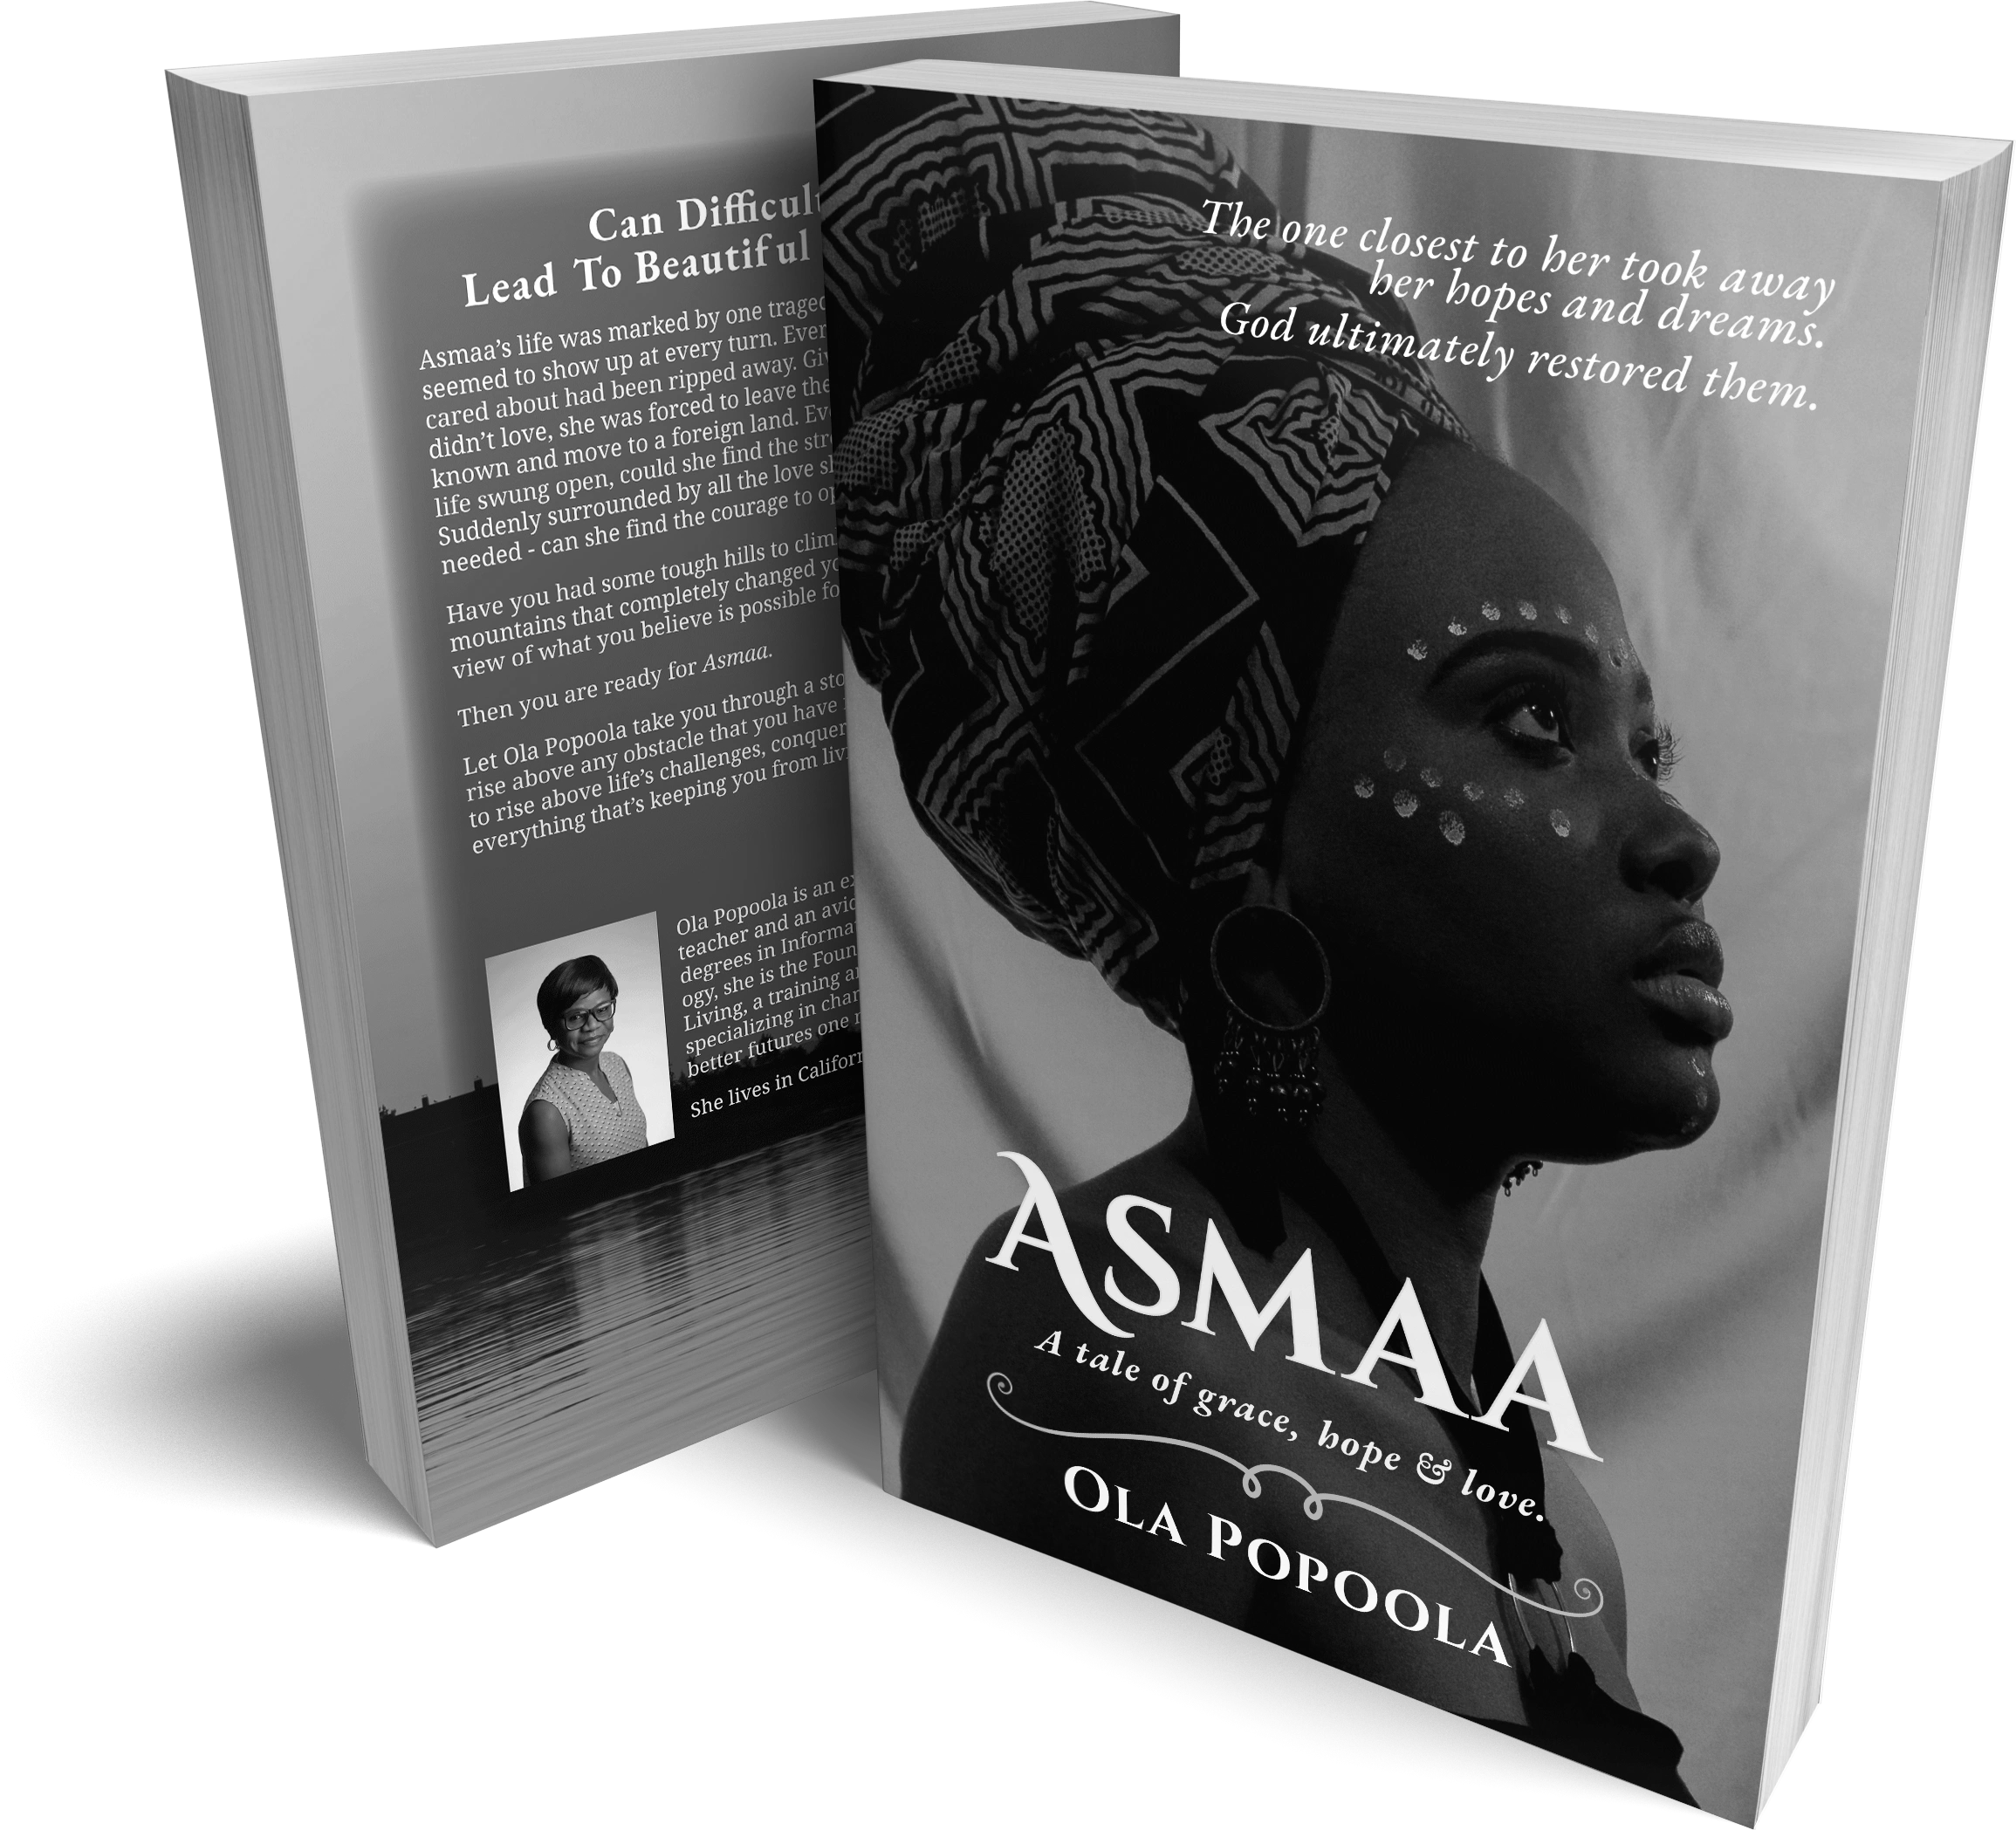 Ola's first book image. Title of book is Asmaa.